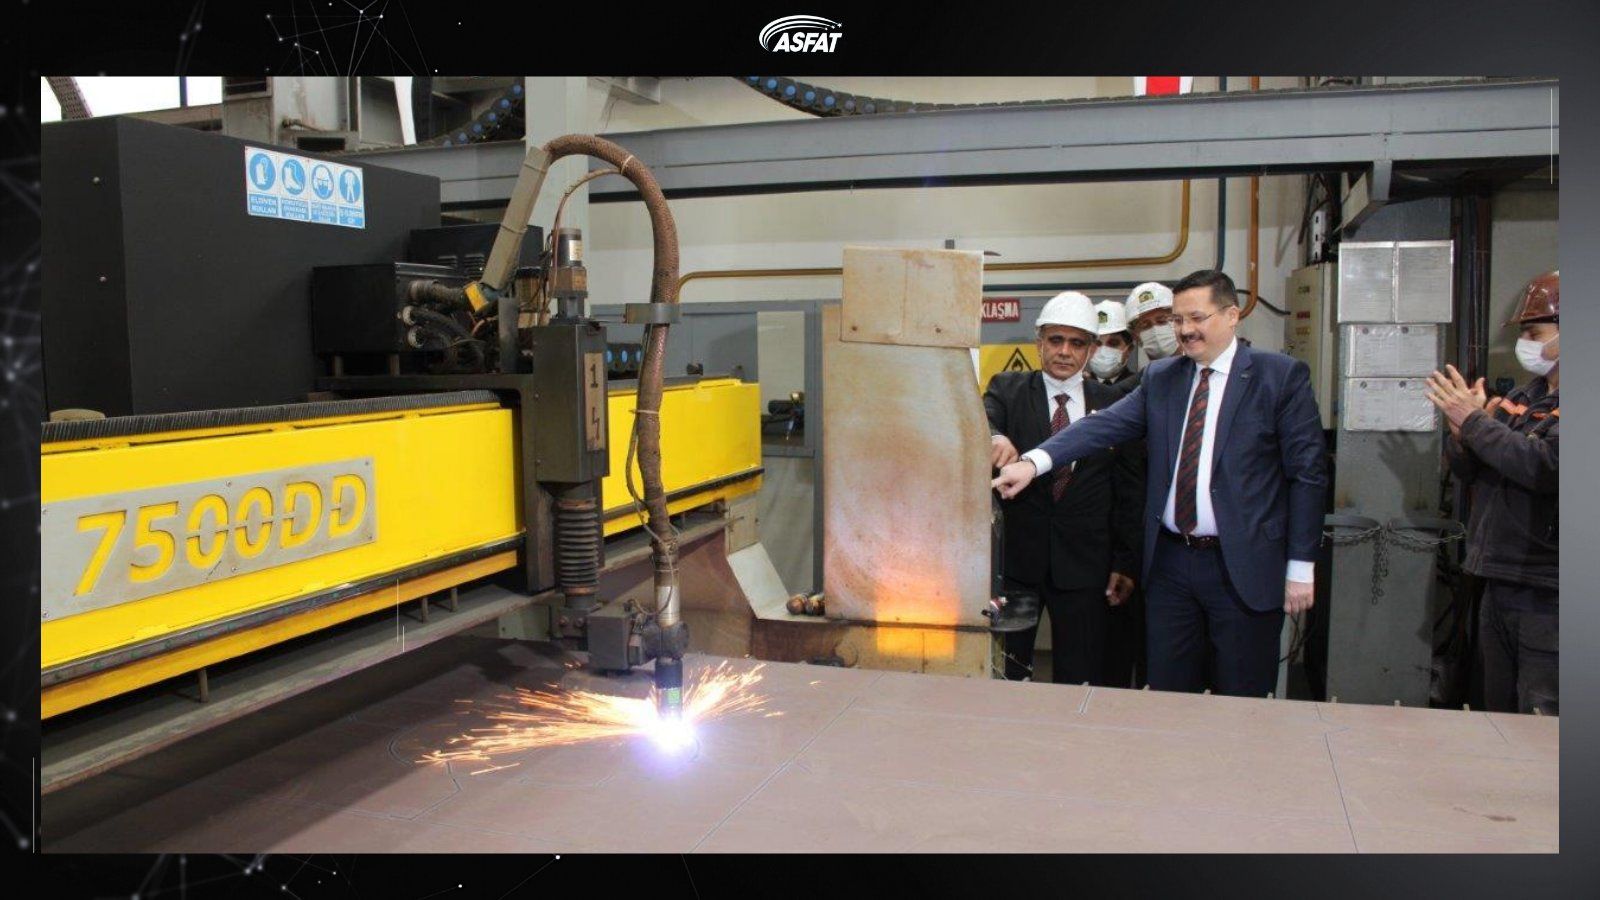 ASFAT Starts the Construction of First OPV Design, Aksihar